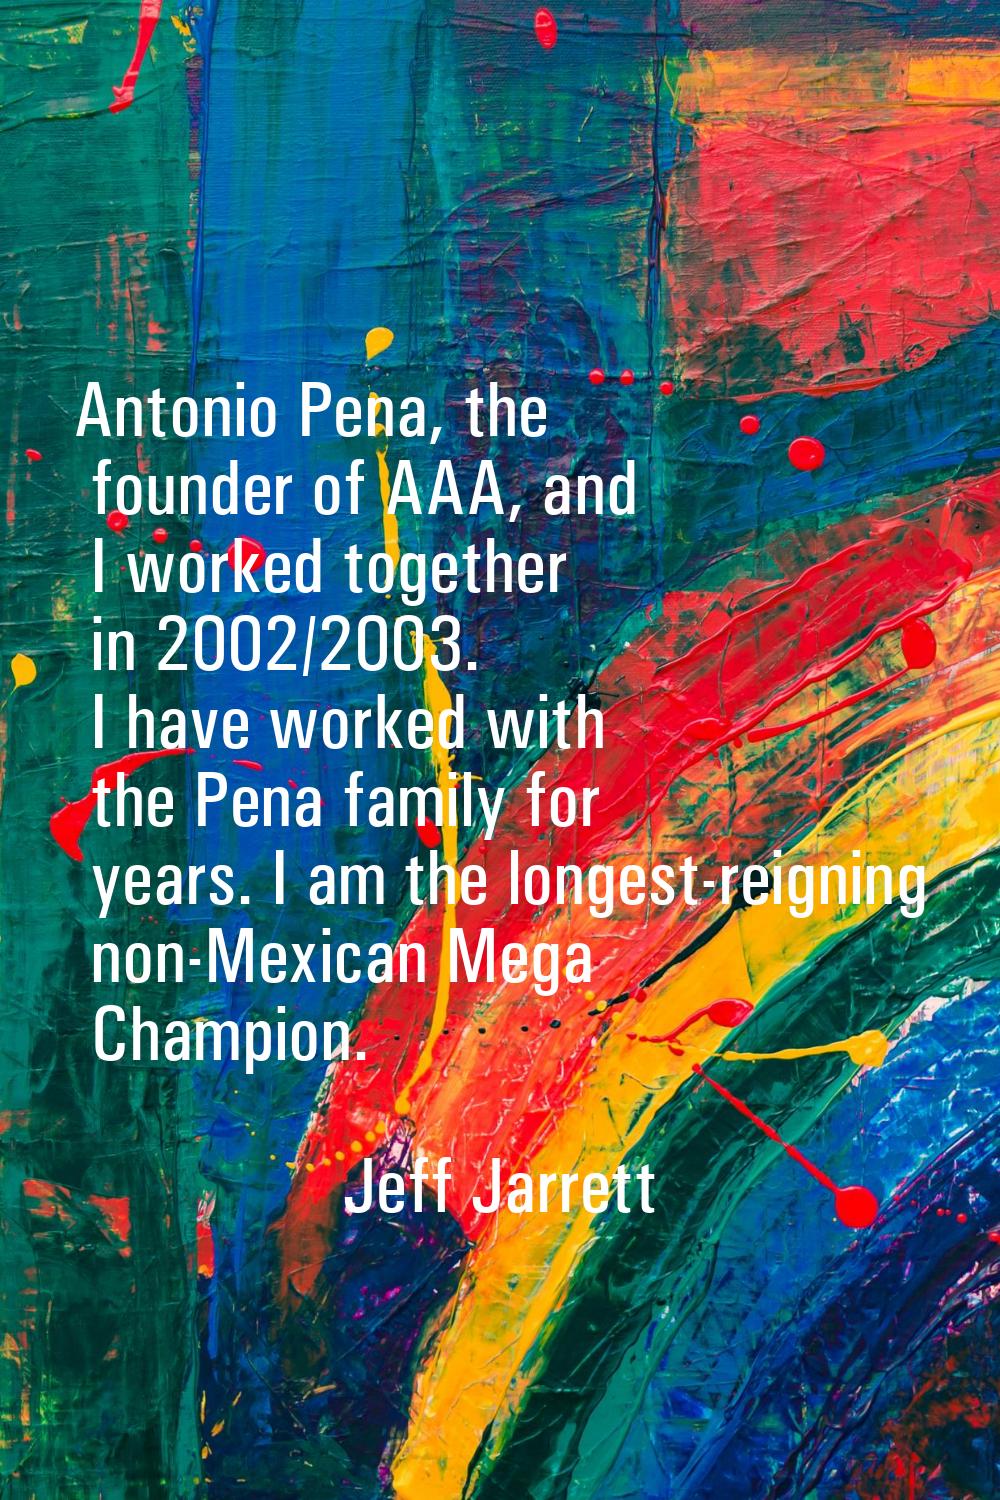 Antonio Pena, the founder of AAA, and I worked together in 2002/2003. I have worked with the Pena f